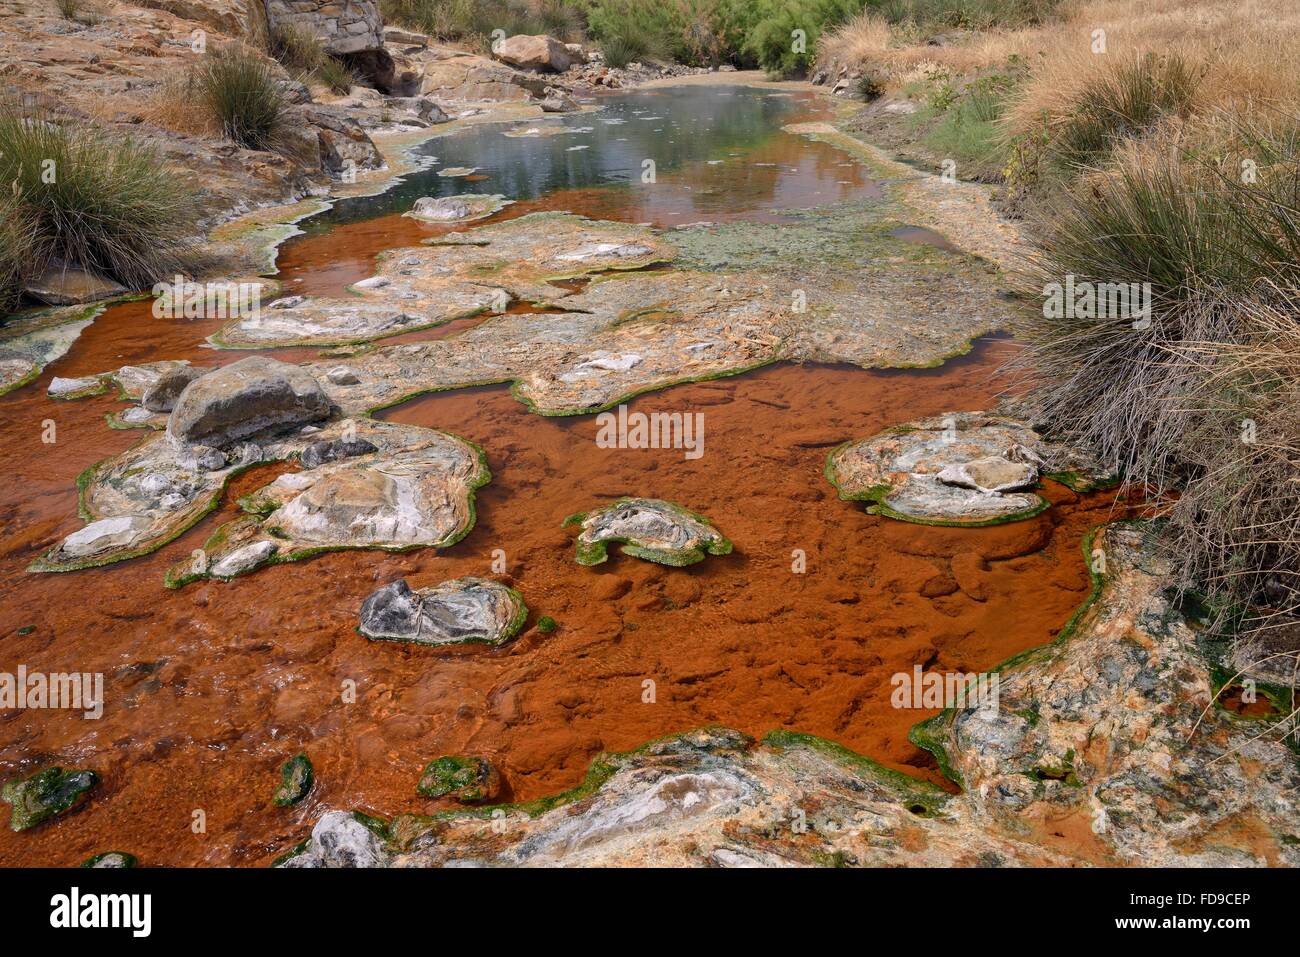 Thermal river, fed with boiling water from hot springs, with colourful growths of blue-green algae, Polychnitos, Lesbos. Stock Photo